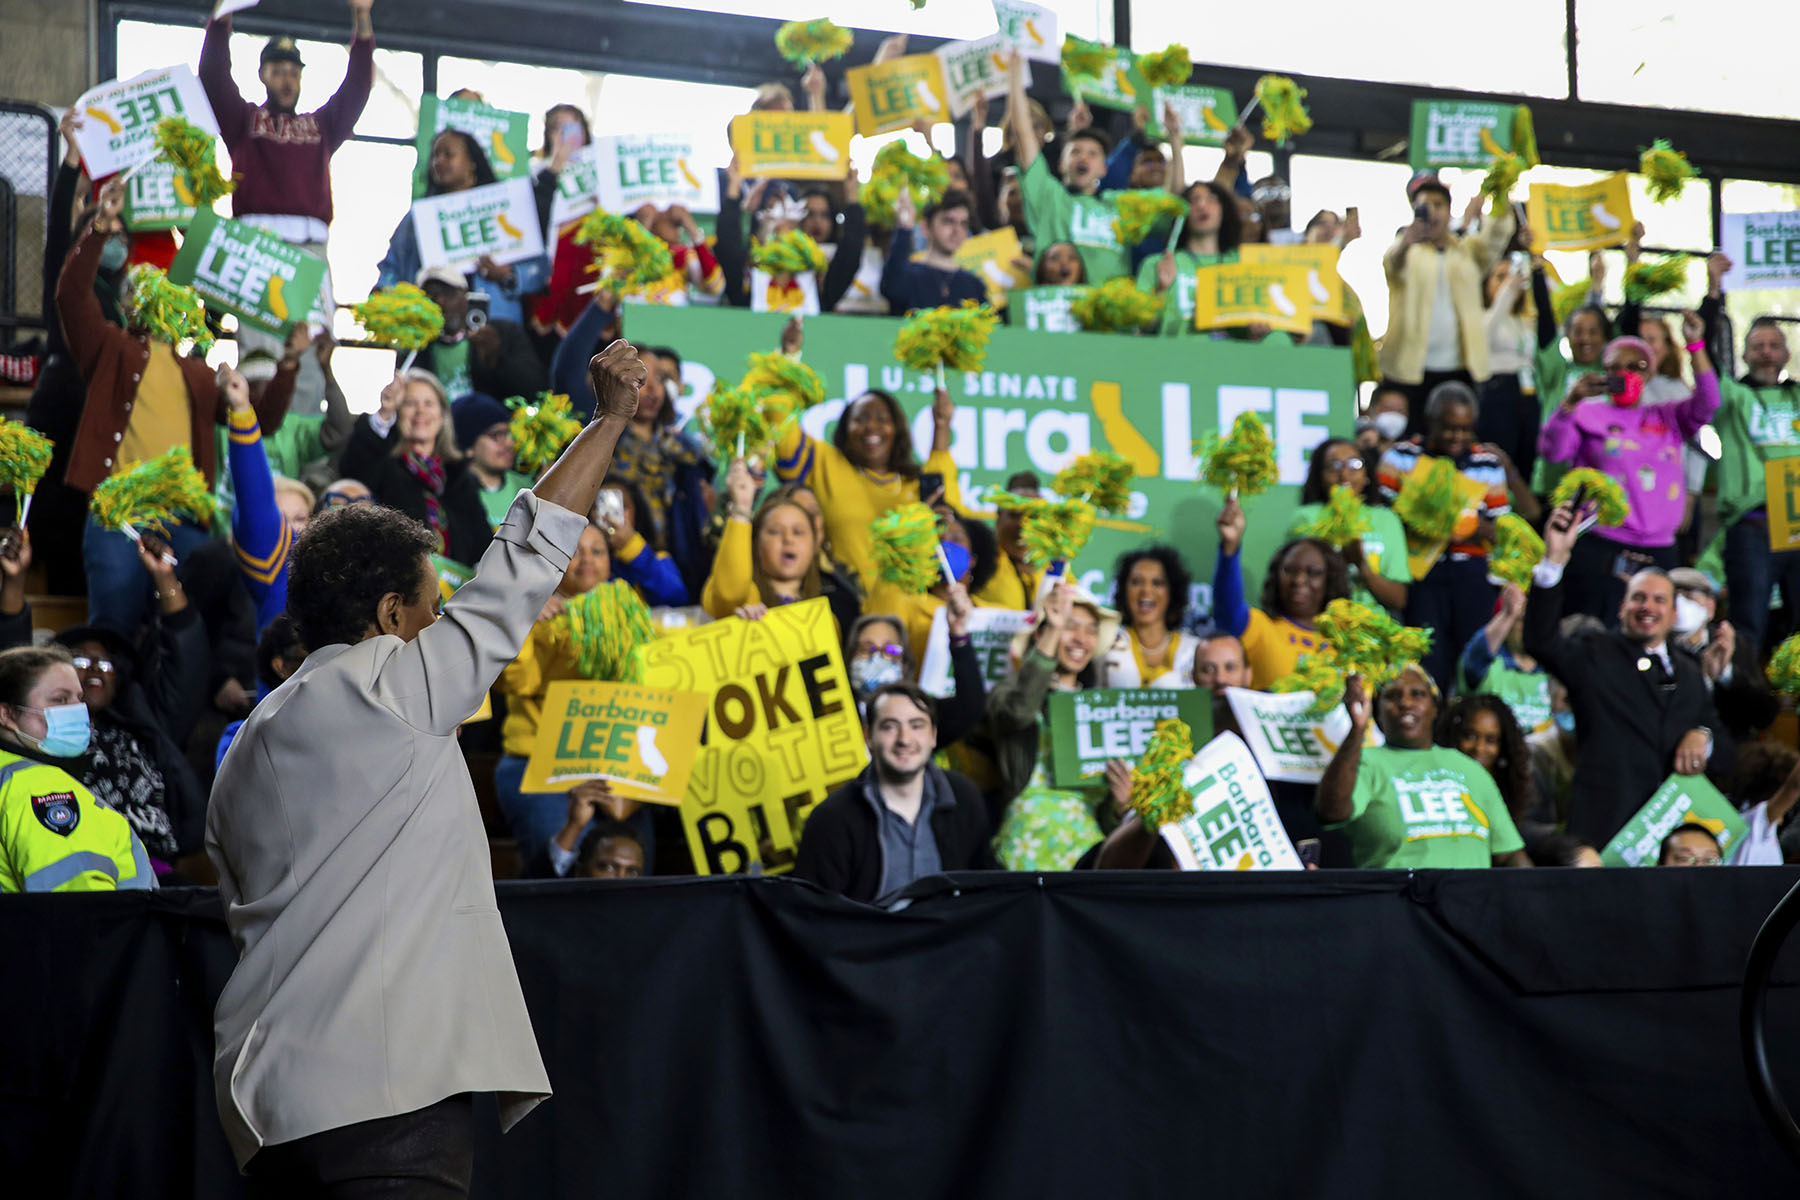 Lee walks to the stage with a raised fist during the launch of her Senate campaign.